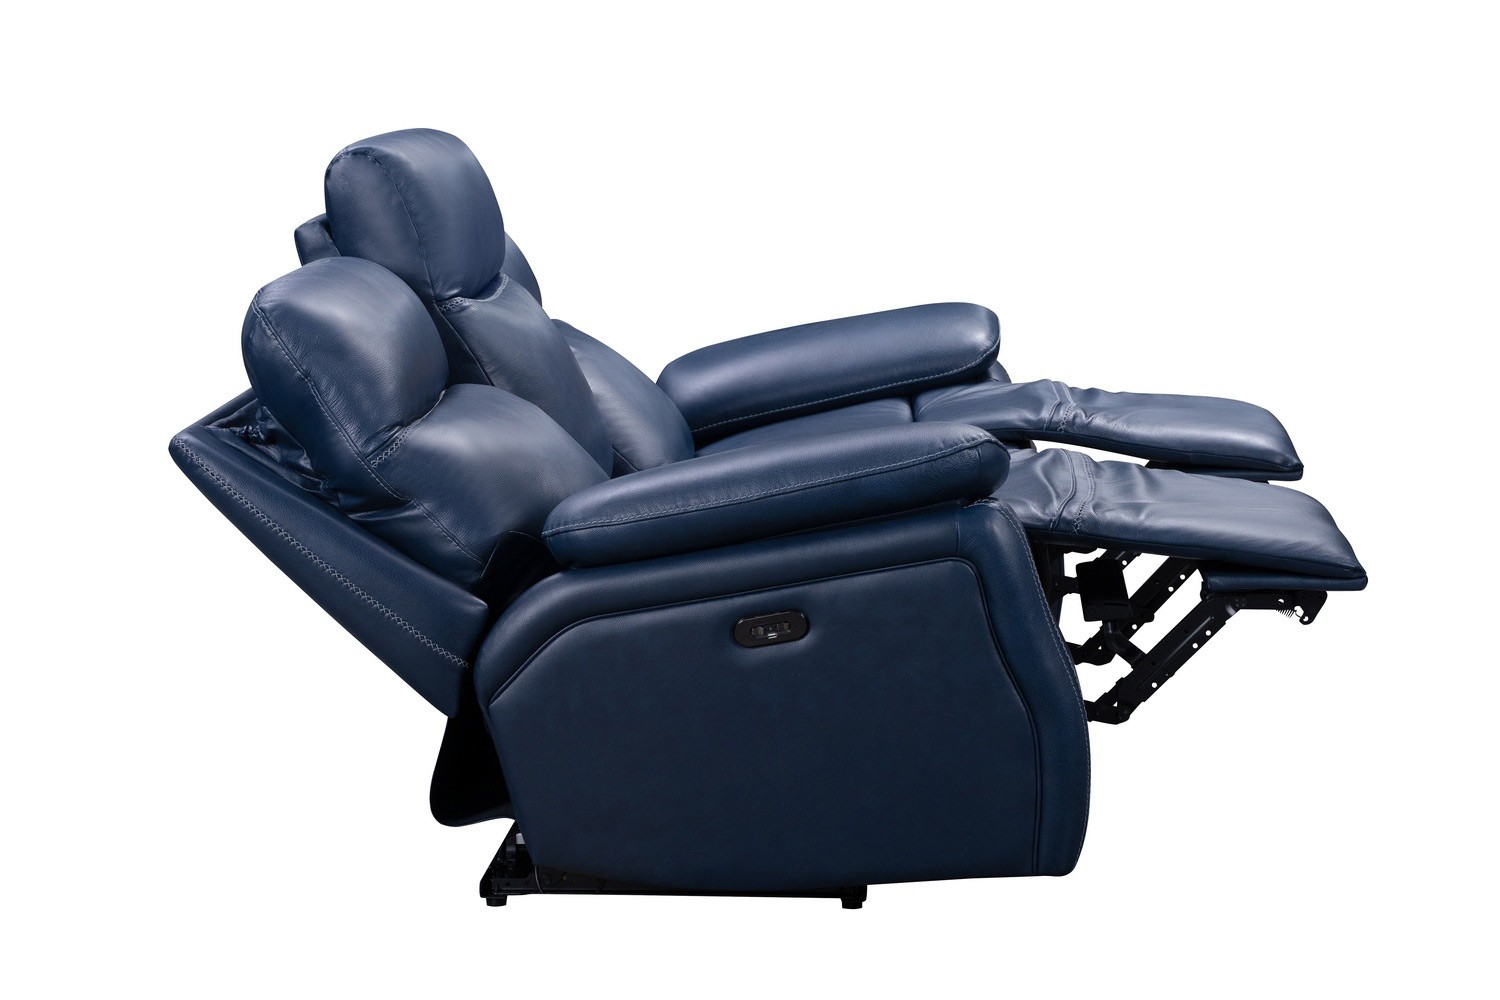 Barcalounger Micah Power Reclining Sofa with Power Head Rests - Marco Navy Blue/Leather Match